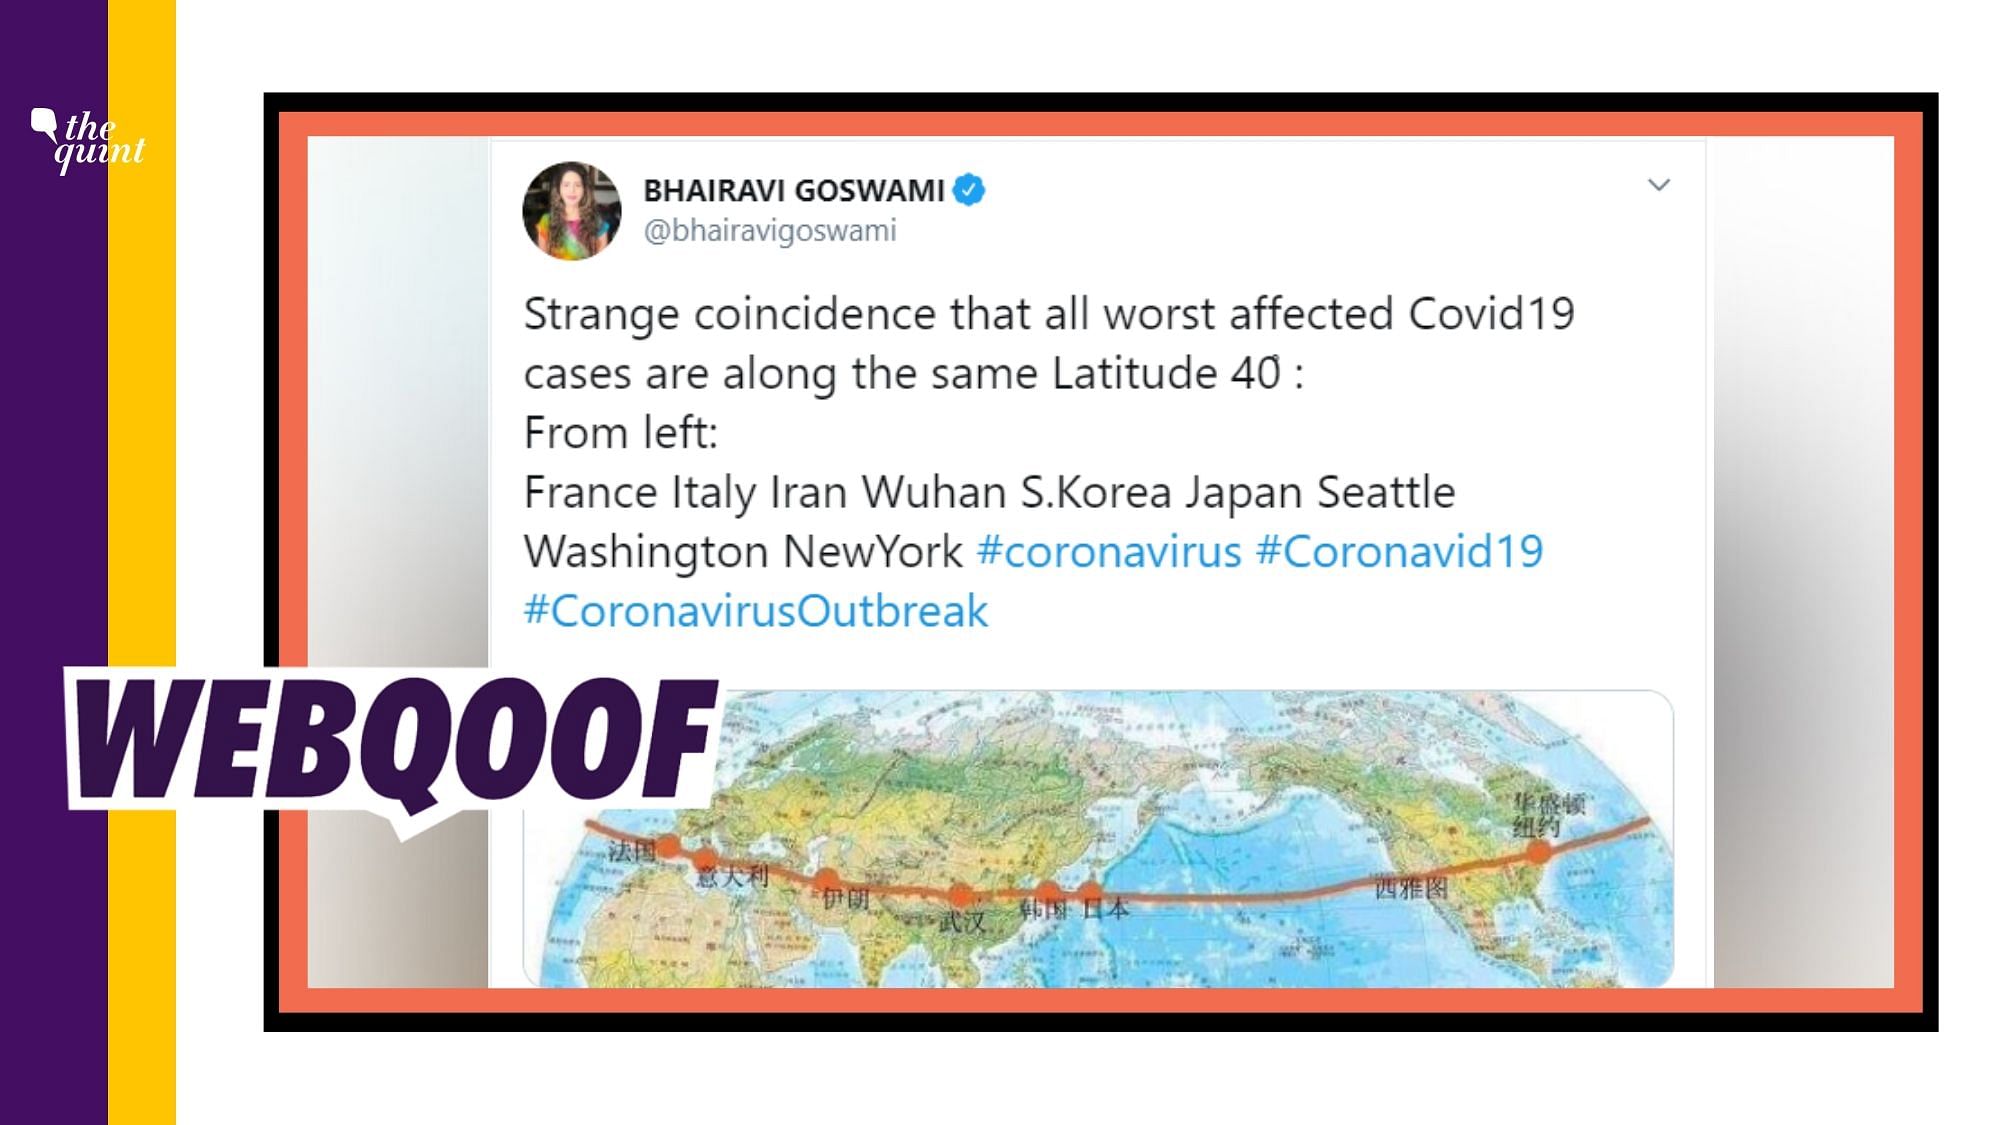 A message has been shared with an image of the globe with a claim that all the worst-affected COVID-19 cases are situated along Latitude 40 degrees.